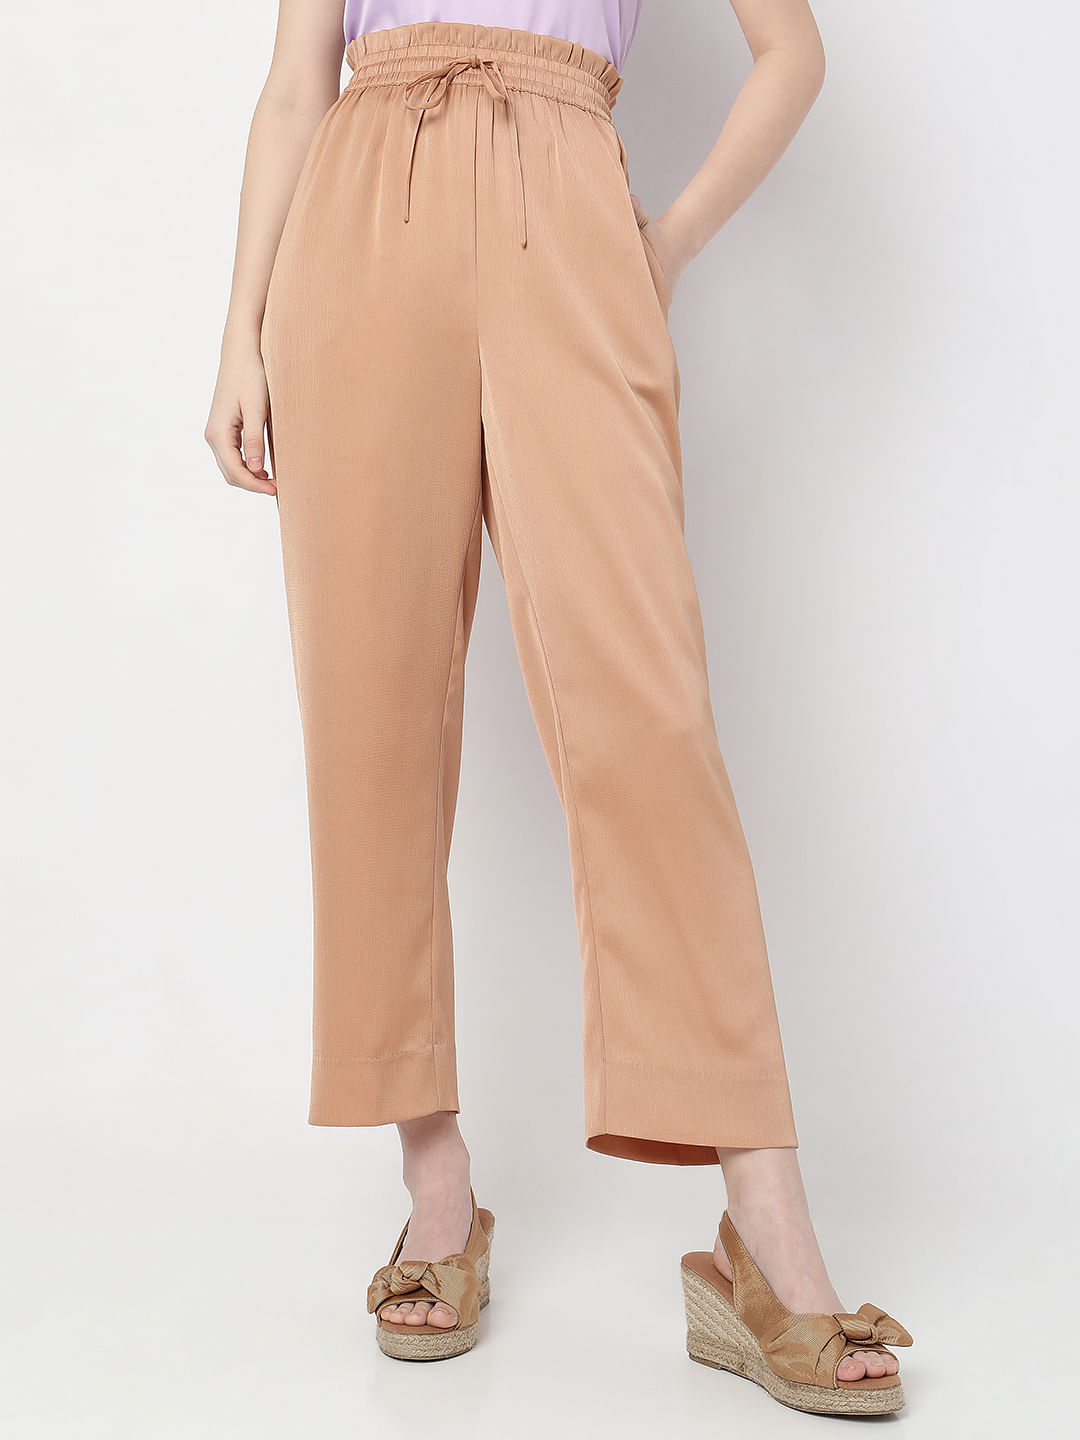 ASOS LUXE wide leg satin pants in red  part of a set  ASOS